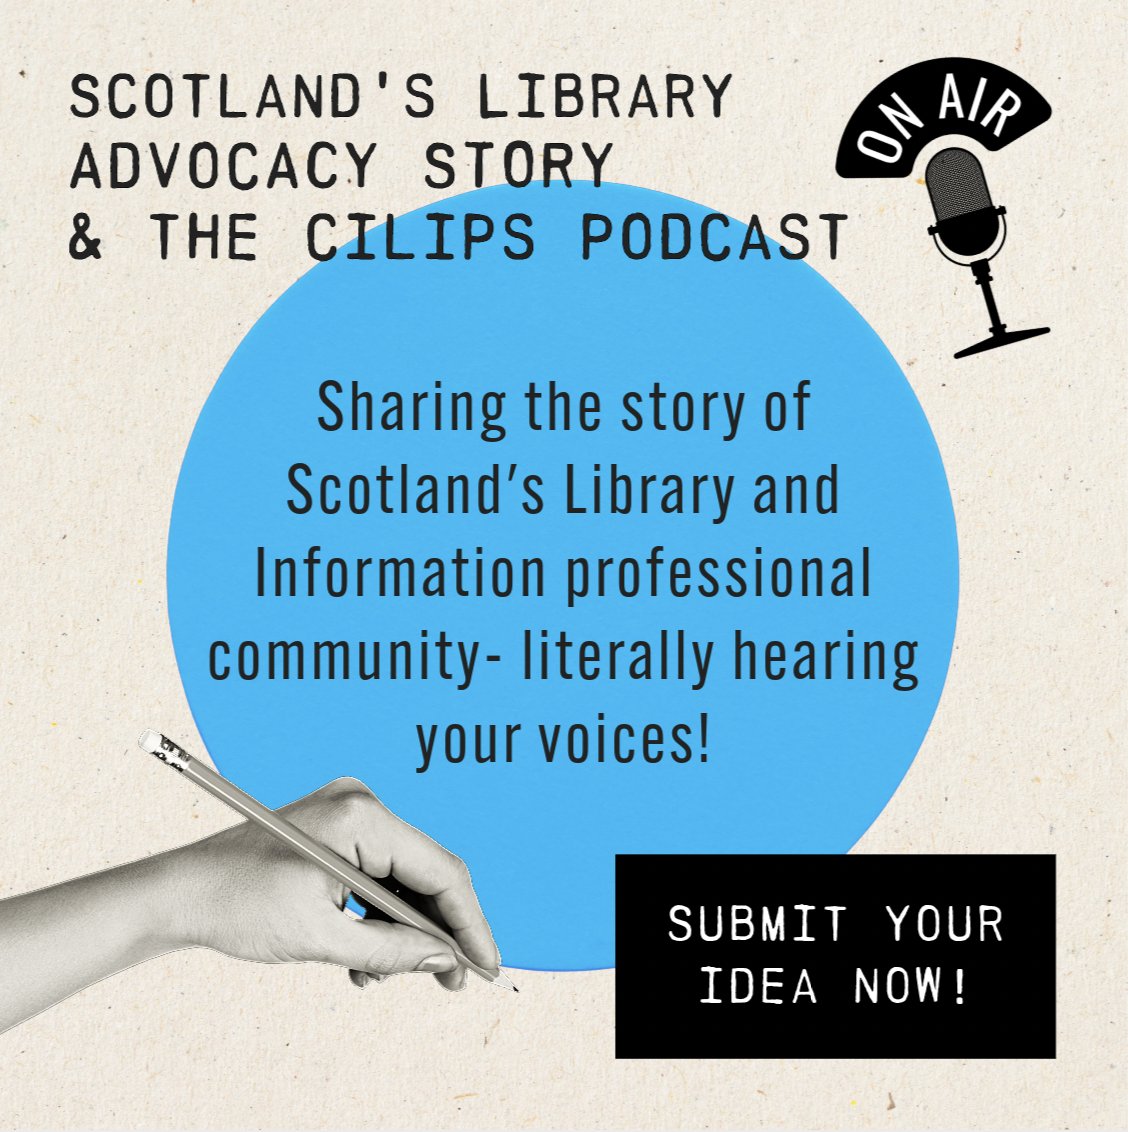 Our podcast platforms are the best way for us to share the voices of members. #NationalShareAStoryMonth 📖 The submission form for podcast ideas is always open and is what inspired our special, 'Scotland's Library Advocacy Story.' 🎙️ Find out more here: cilips.org.uk/about/cilips-p…